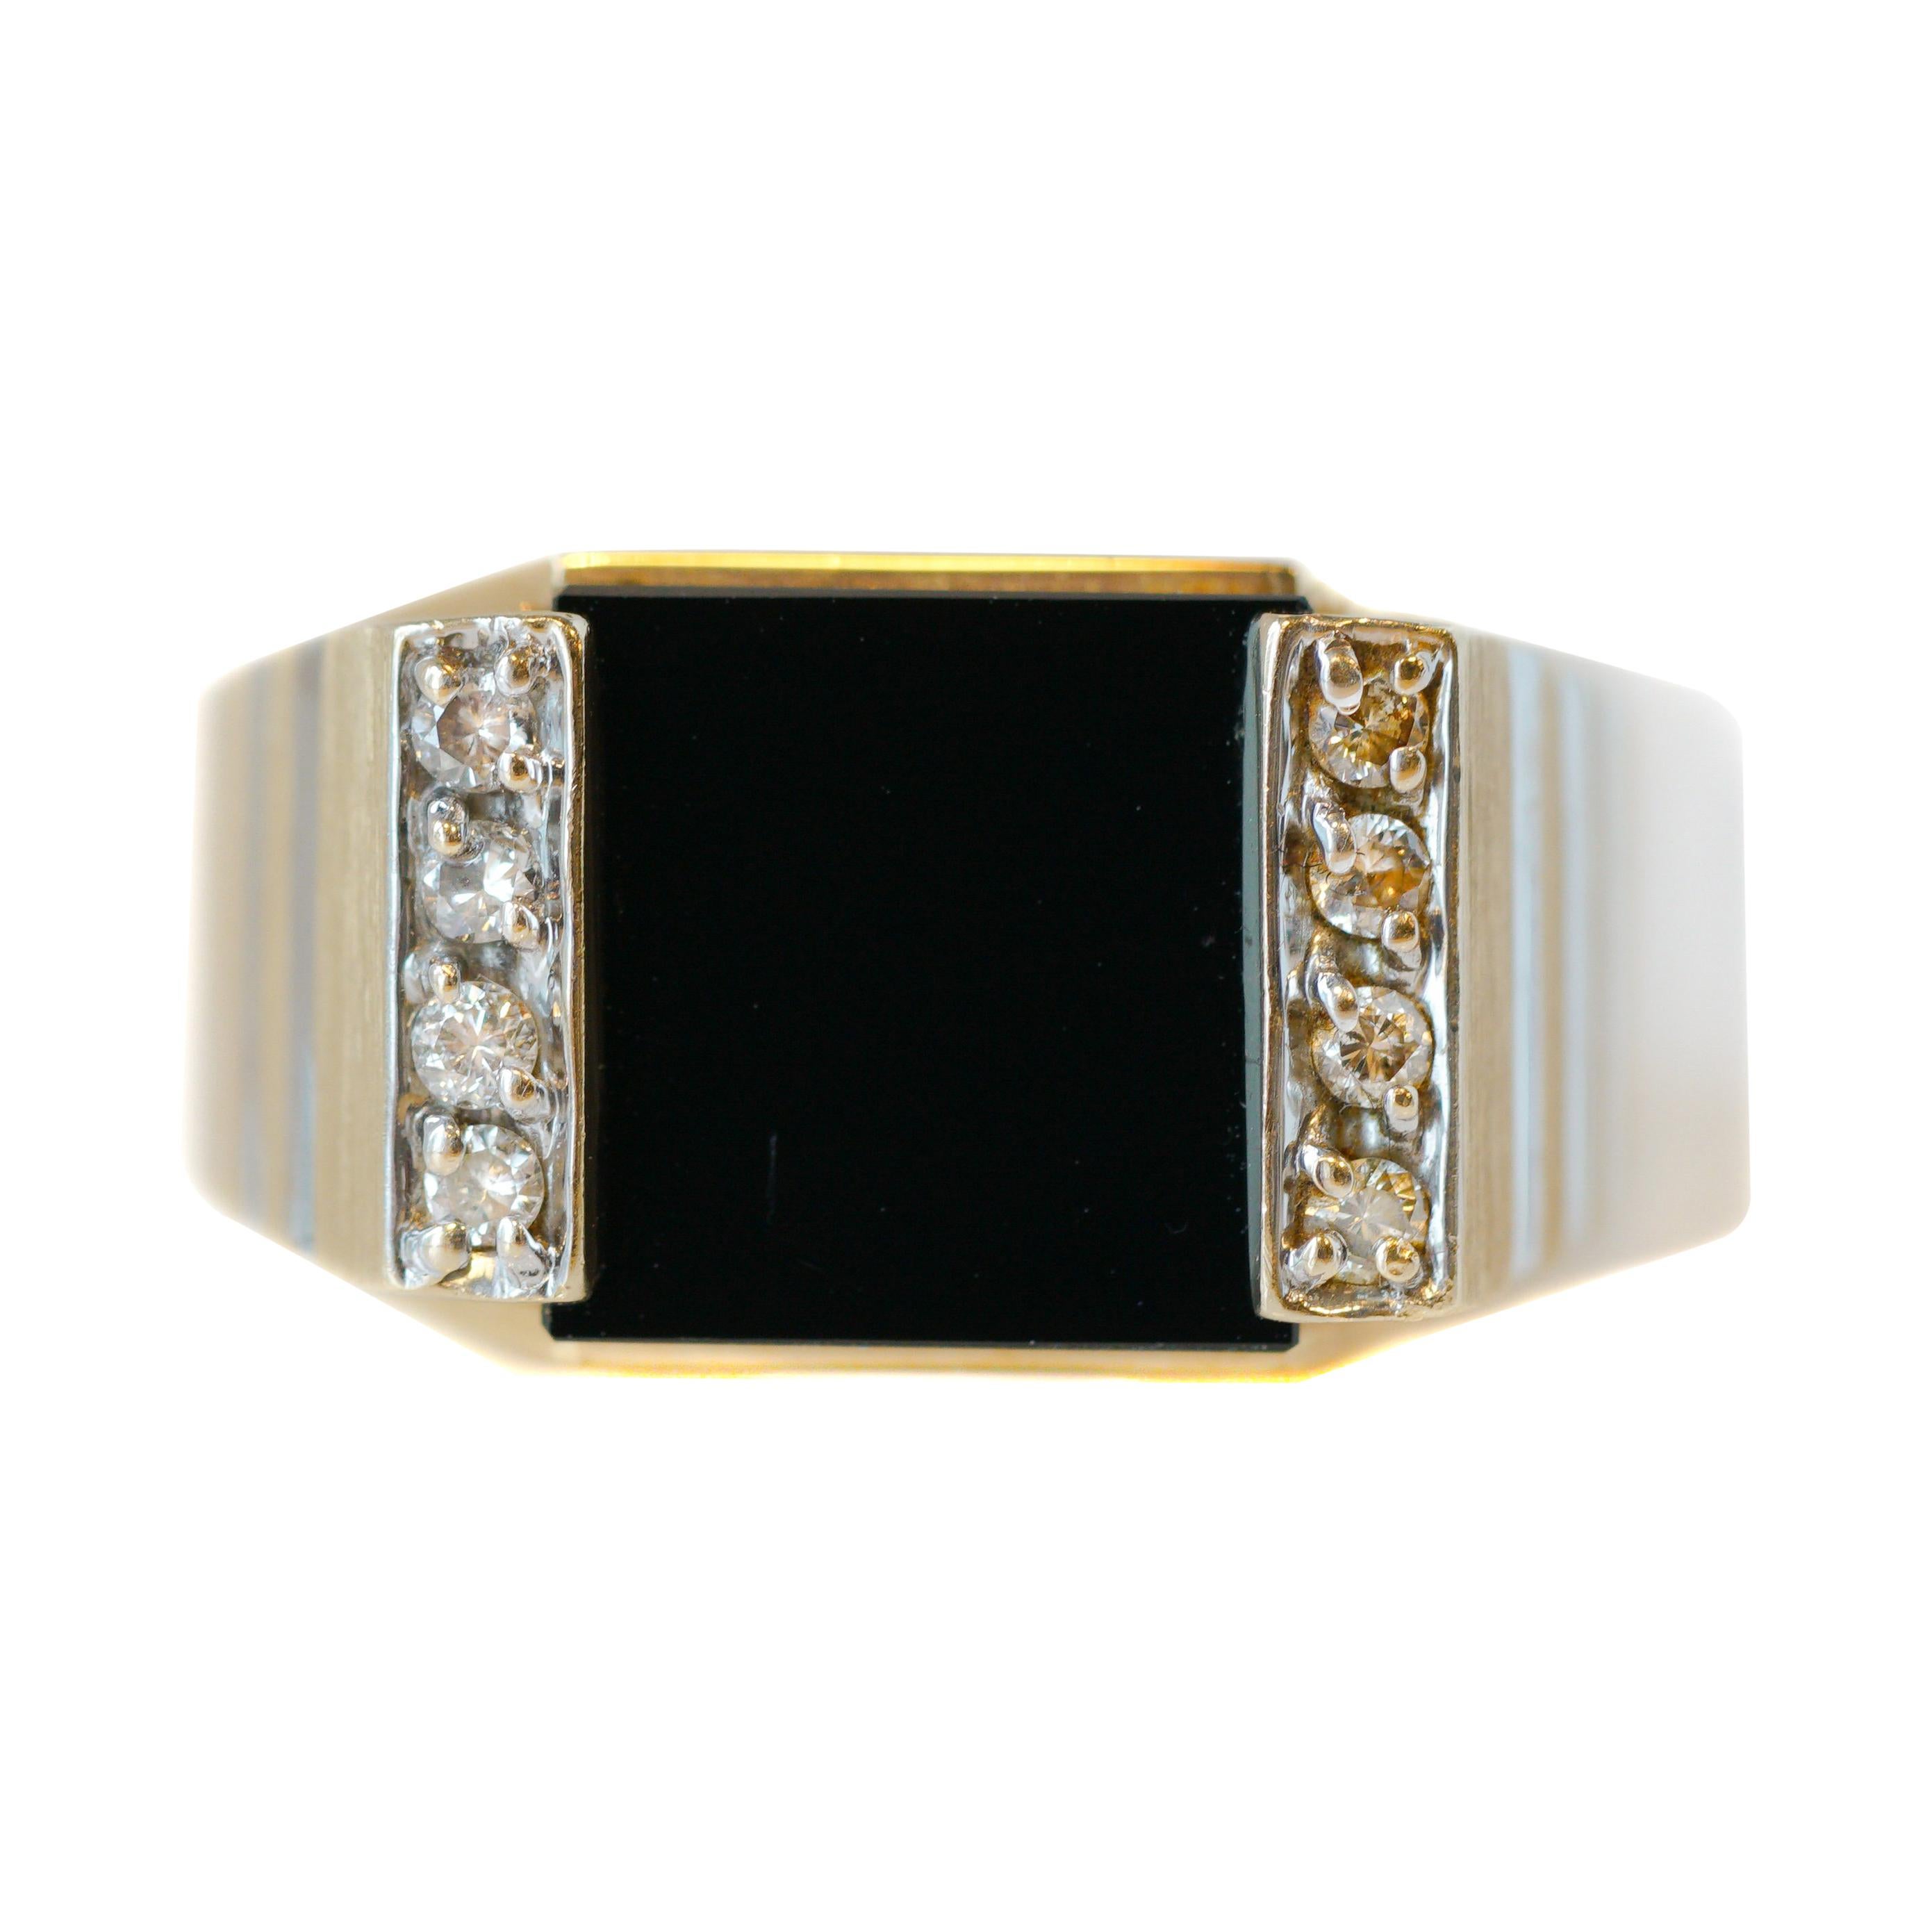 Onyx and Diamond Two-Tone Gold Men's Ring